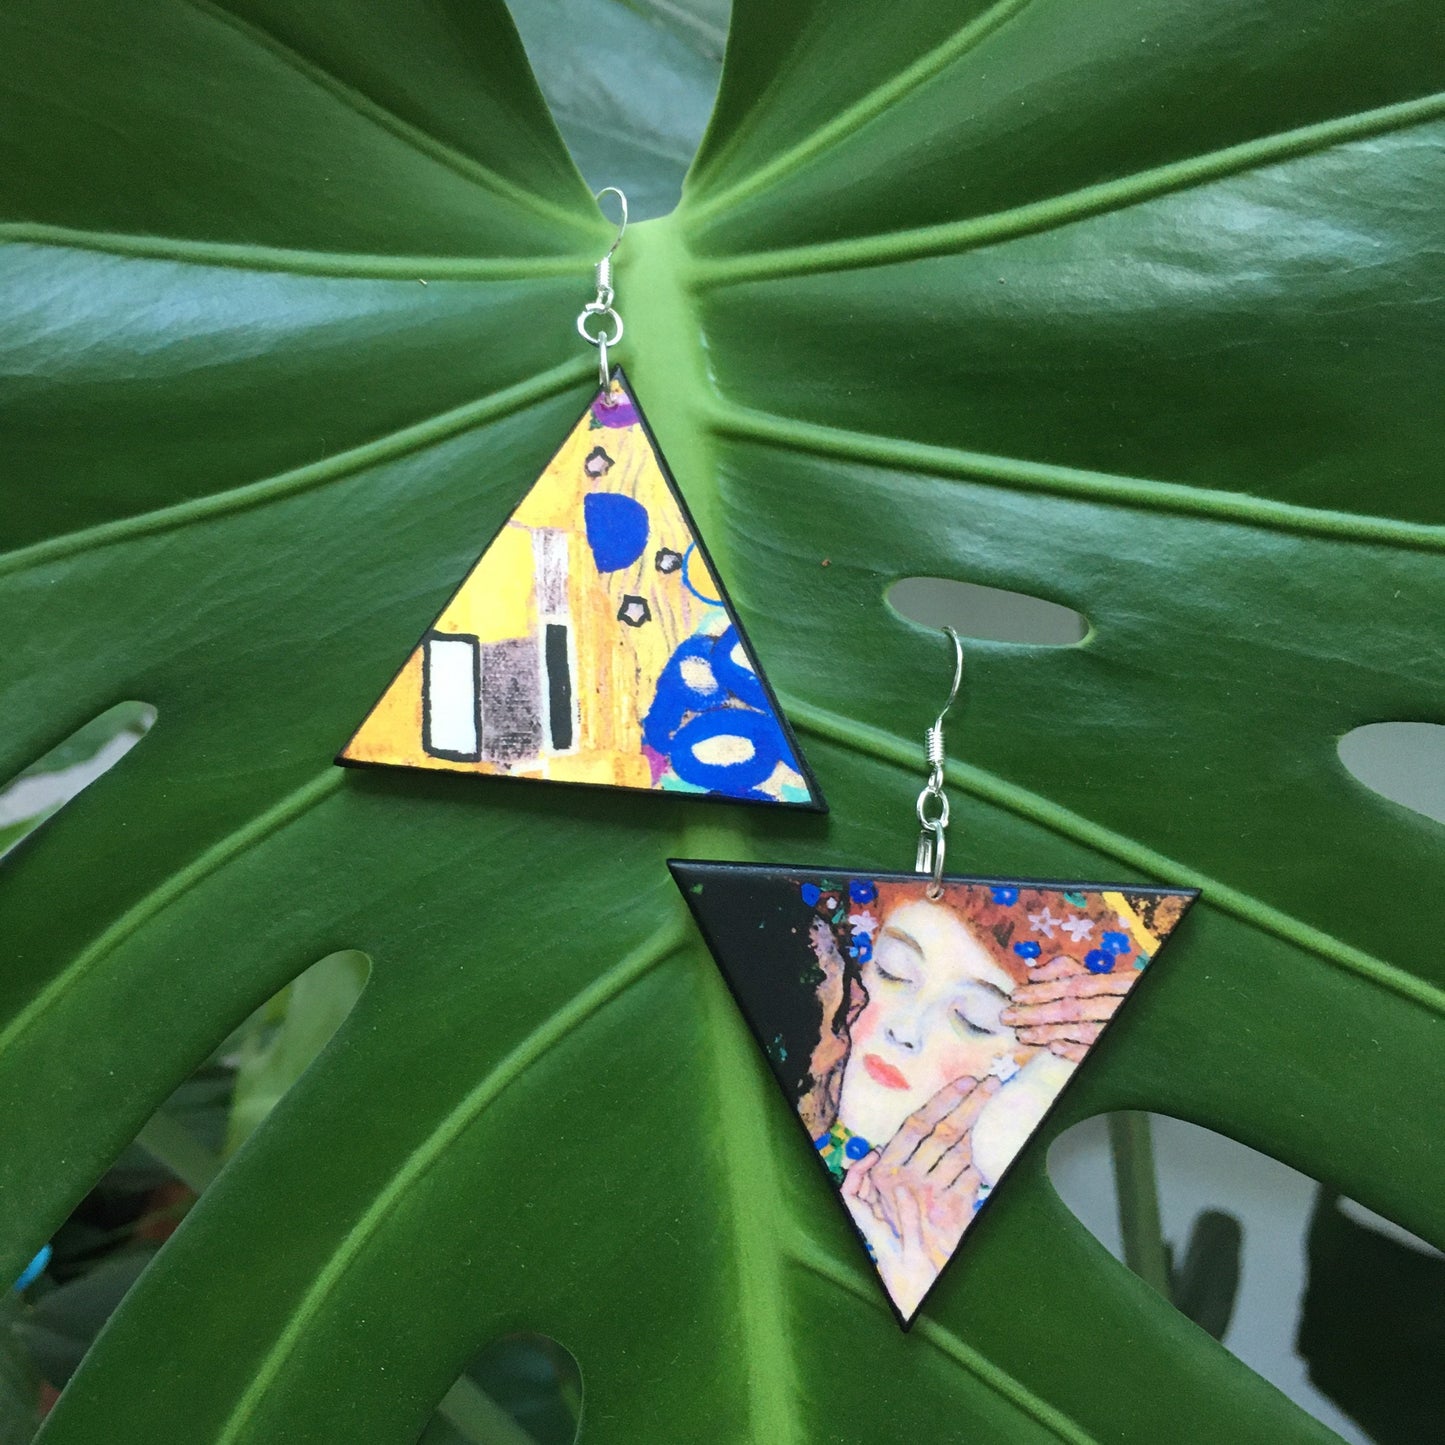 Obljewellery Earrings inspired by Gustav Klimt and his painting The Kiss to create these  triangular, mismatched earrings on wood.